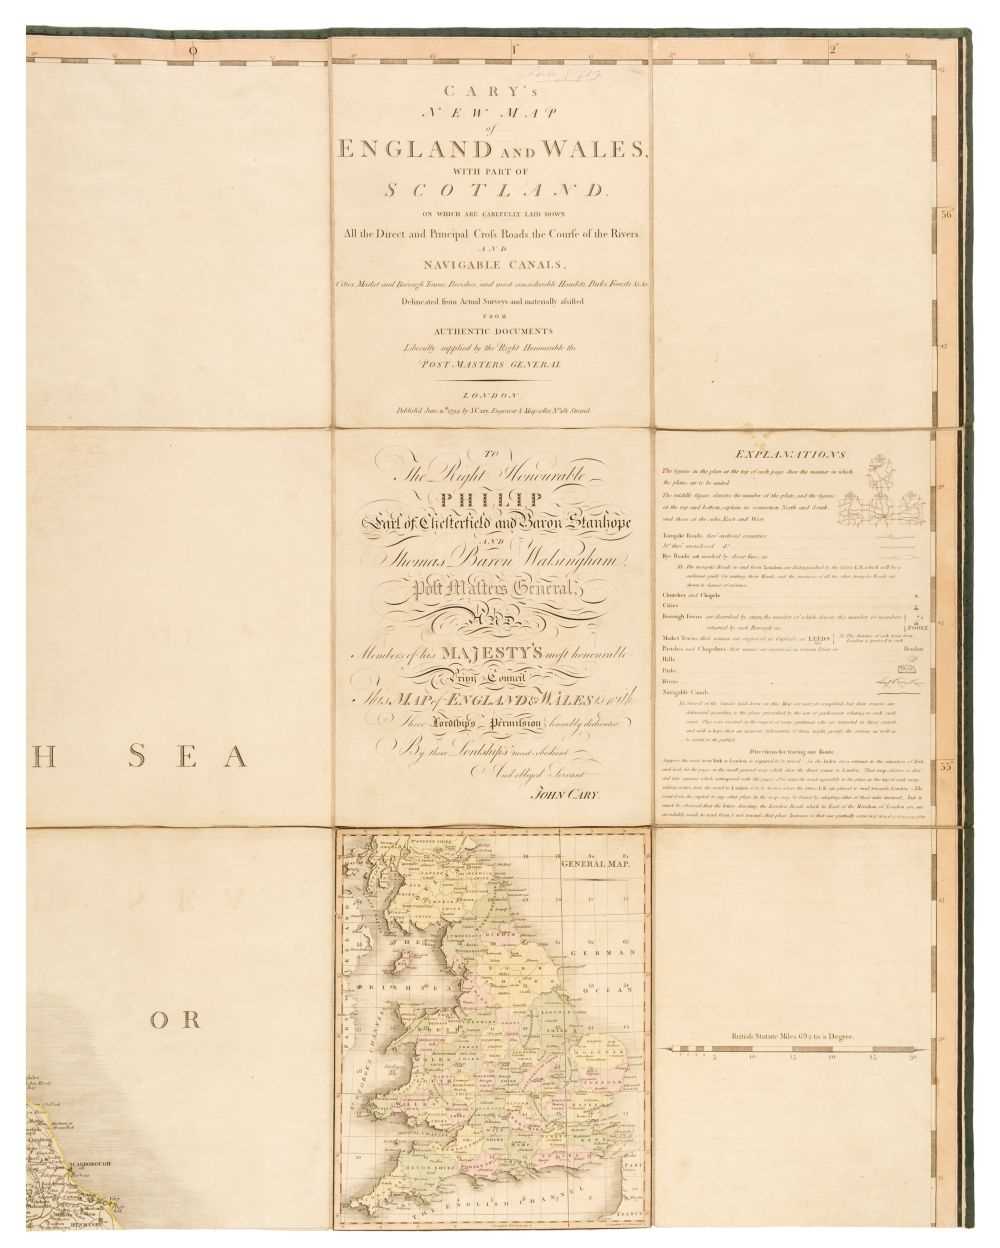 Lot 161 - England & Wales. Cary (John), Cary's New Map of England and Wales..., 1794